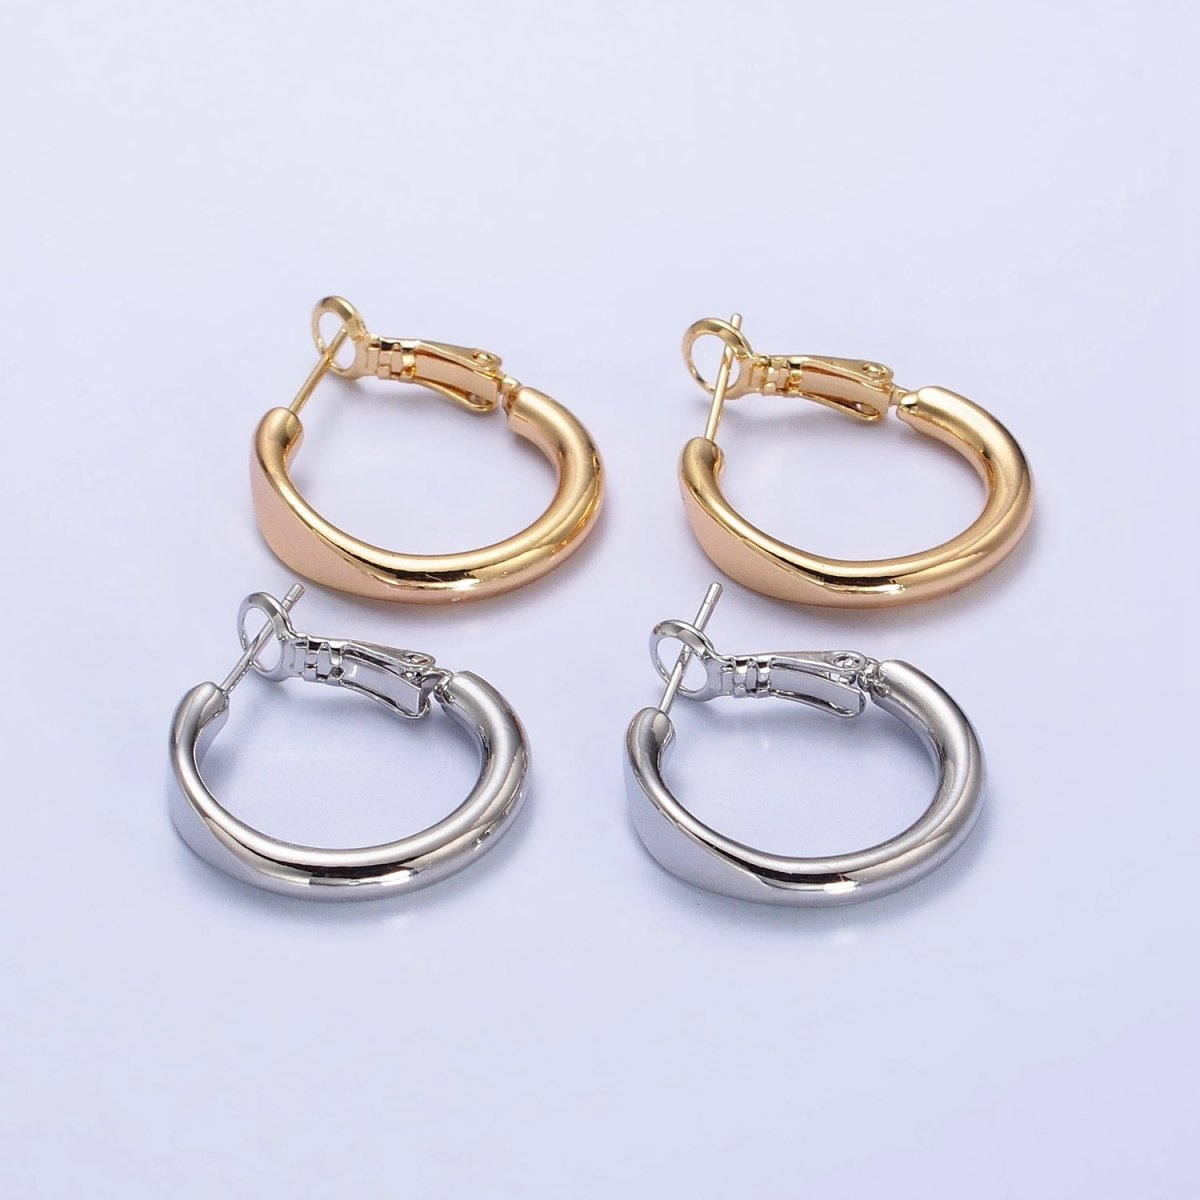 Gold Filled 20mm Rounded Geometric Hinge Hoop Earrings in Gold & Silver | AB553 AB554 - DLUXCA